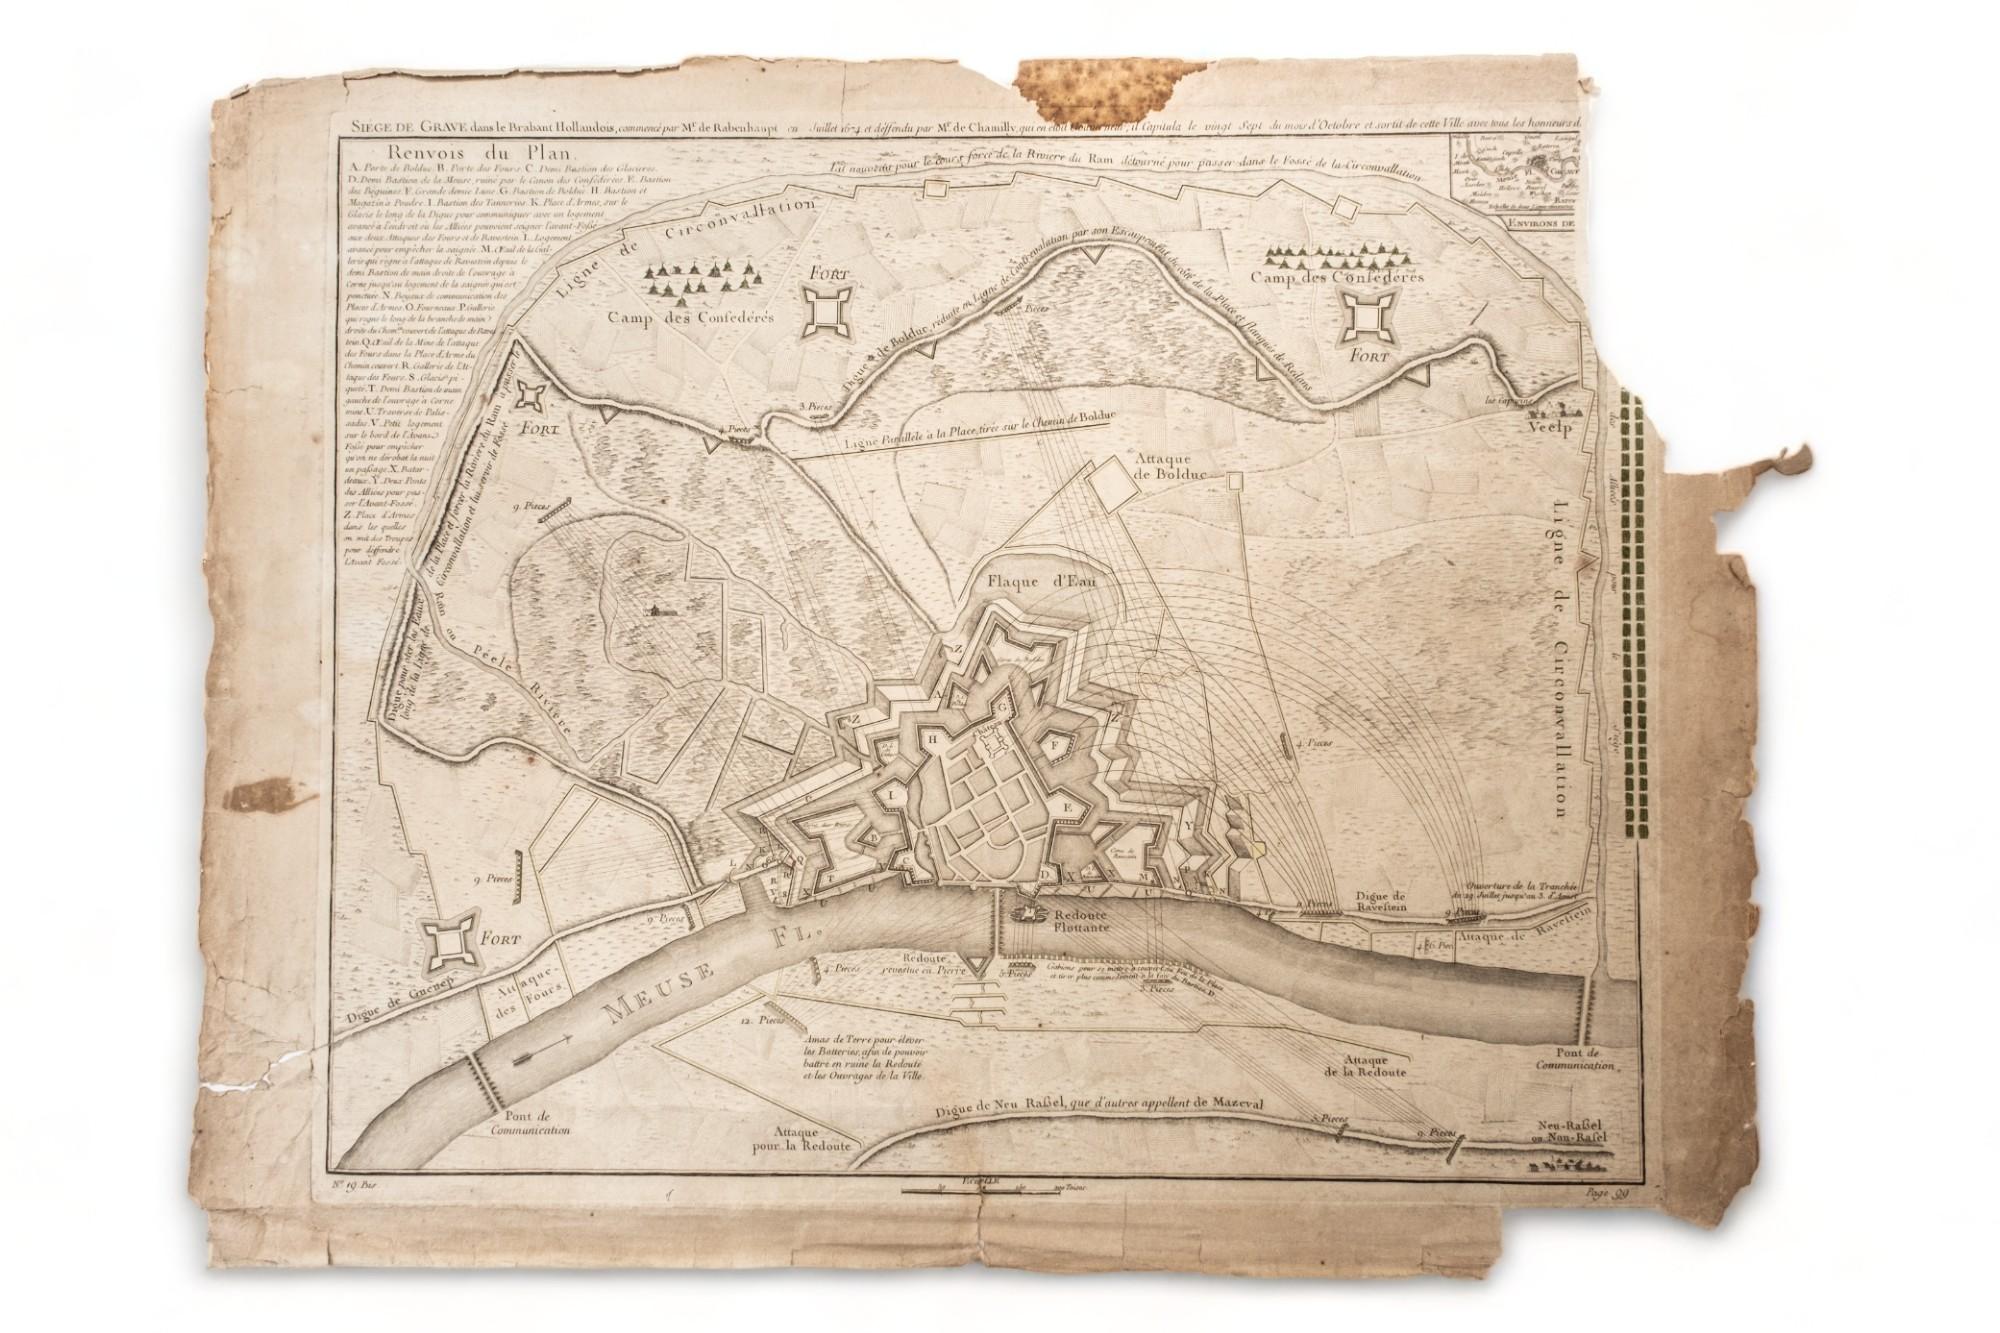 RARE French 17th-18th Century Enhanced Siege of Graves Mapping Engraving BY William III, also widely known as William of Orange,
The Siege of Grave in Dutch Brabant started by Monsieur Carl de Rabenhaupt in July 1674. Carl von Rabenhaupt (6 January